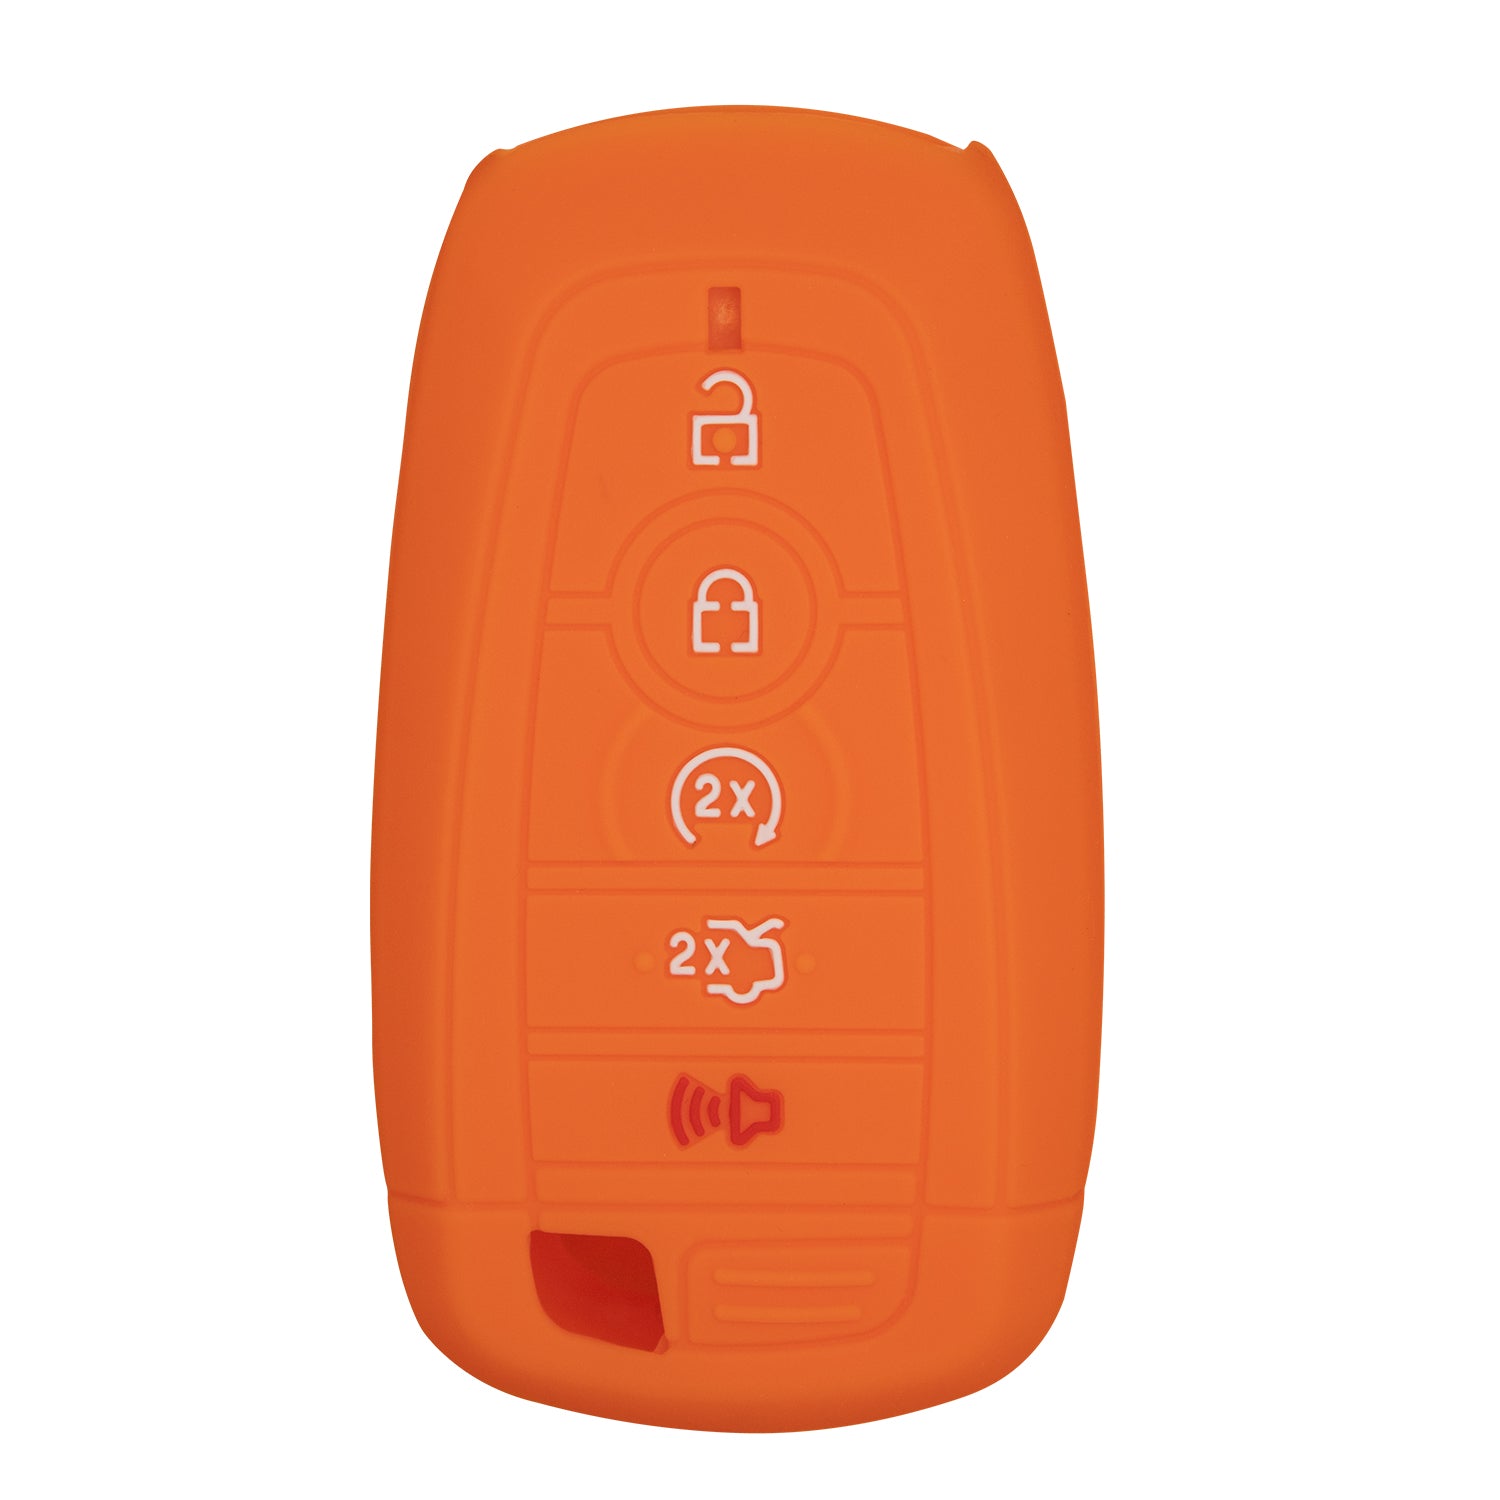 Silicone Case for Smart Key Remote Keyless Entry for Ford Fusion Explorer Edge Mustang Expedition M3N-A2C93142600 164-R8149 164R8149 R8149 (Orange)